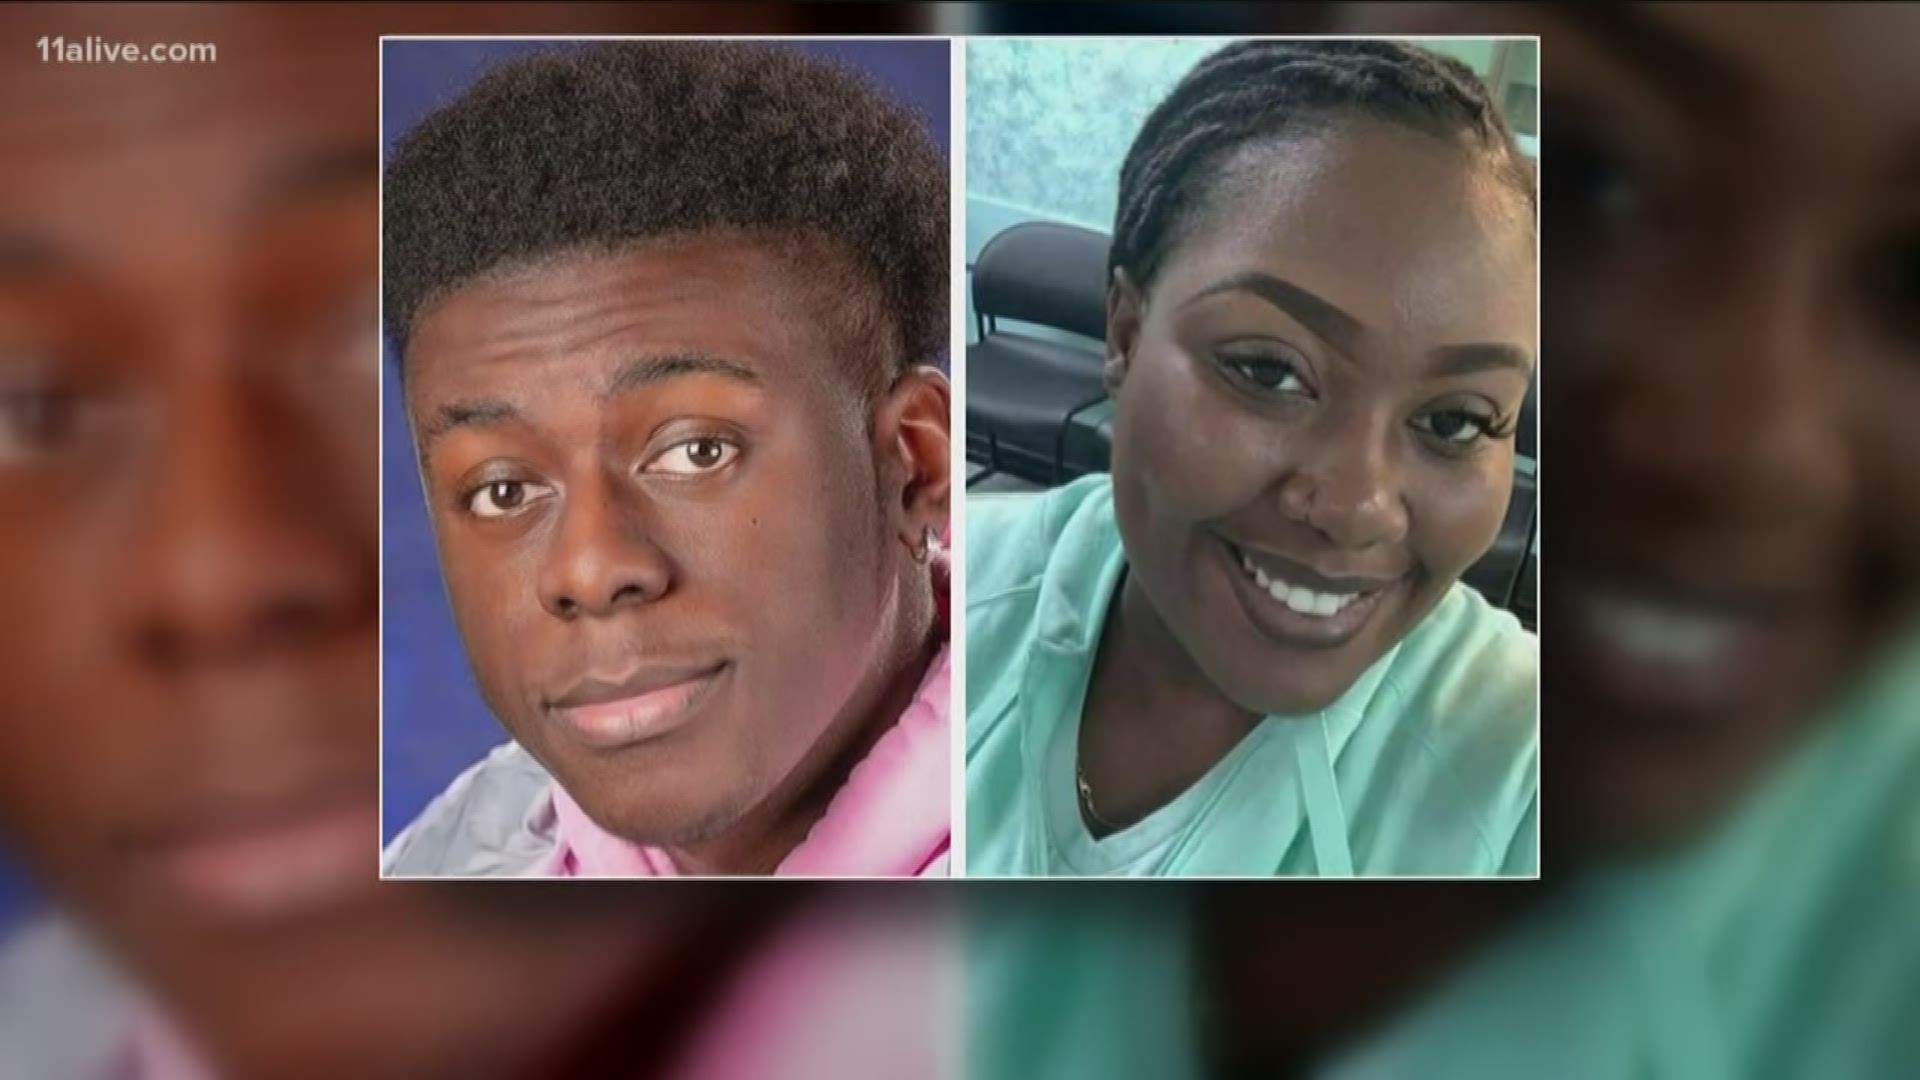 A mom says her son-in-law killed her two adult children.